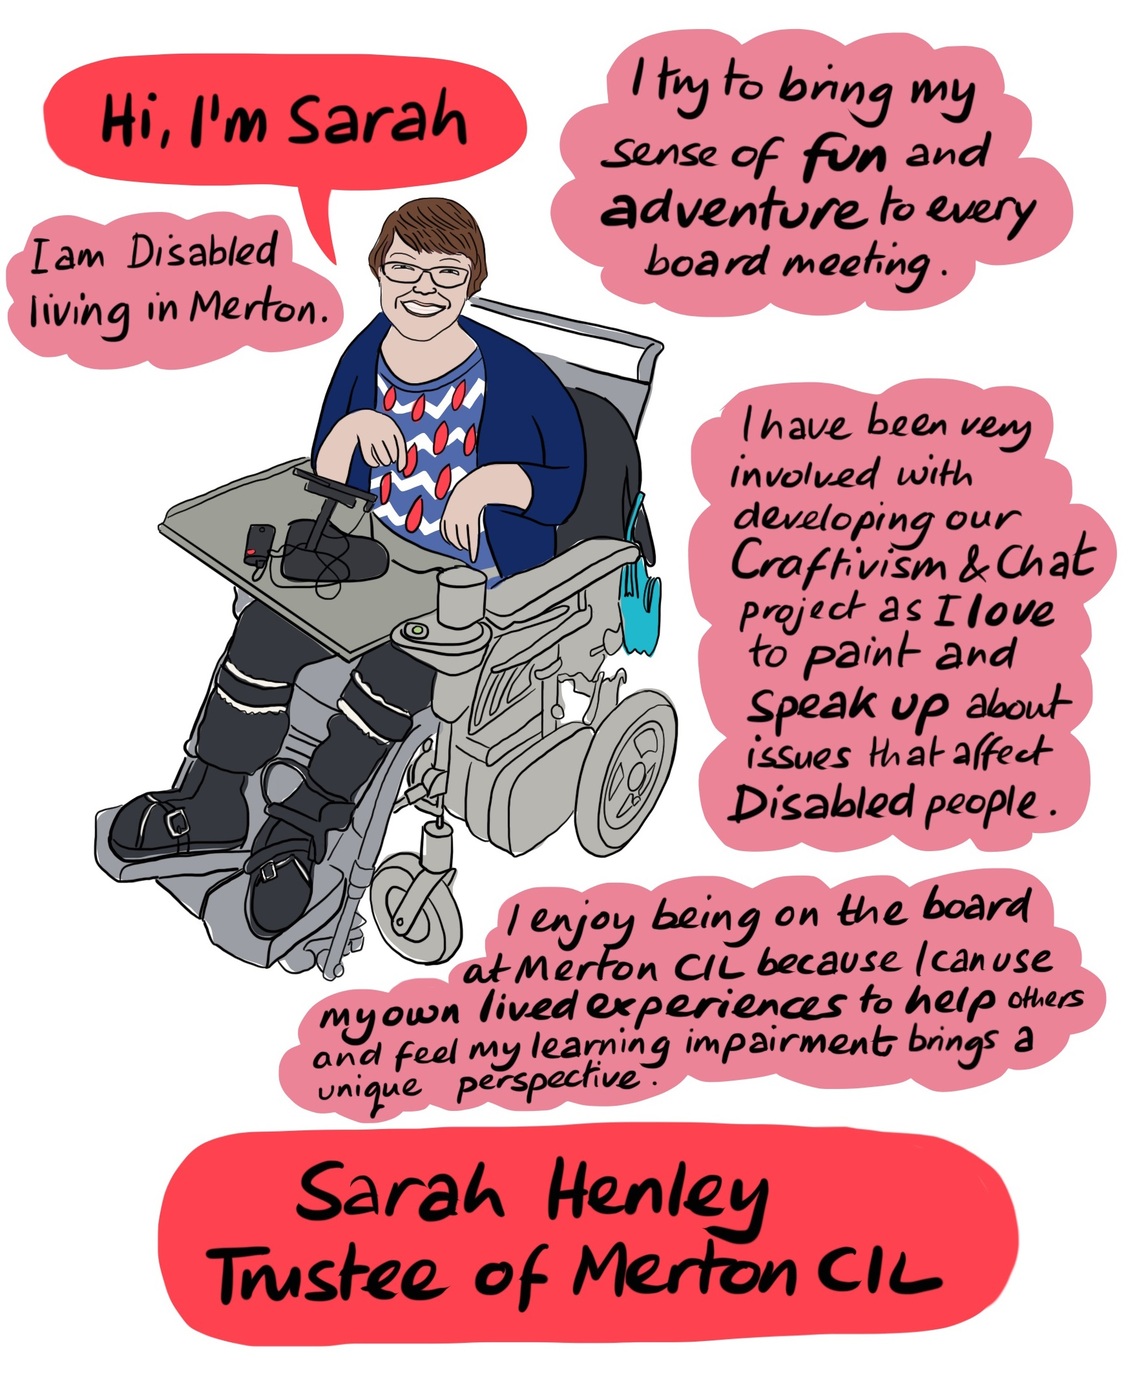 Sarah - Sarah is Disabled and lives in Merton. She brings her sense of fun and adventure to every board meeting. Sarah is very involved with our Craftivism and Chat project. 